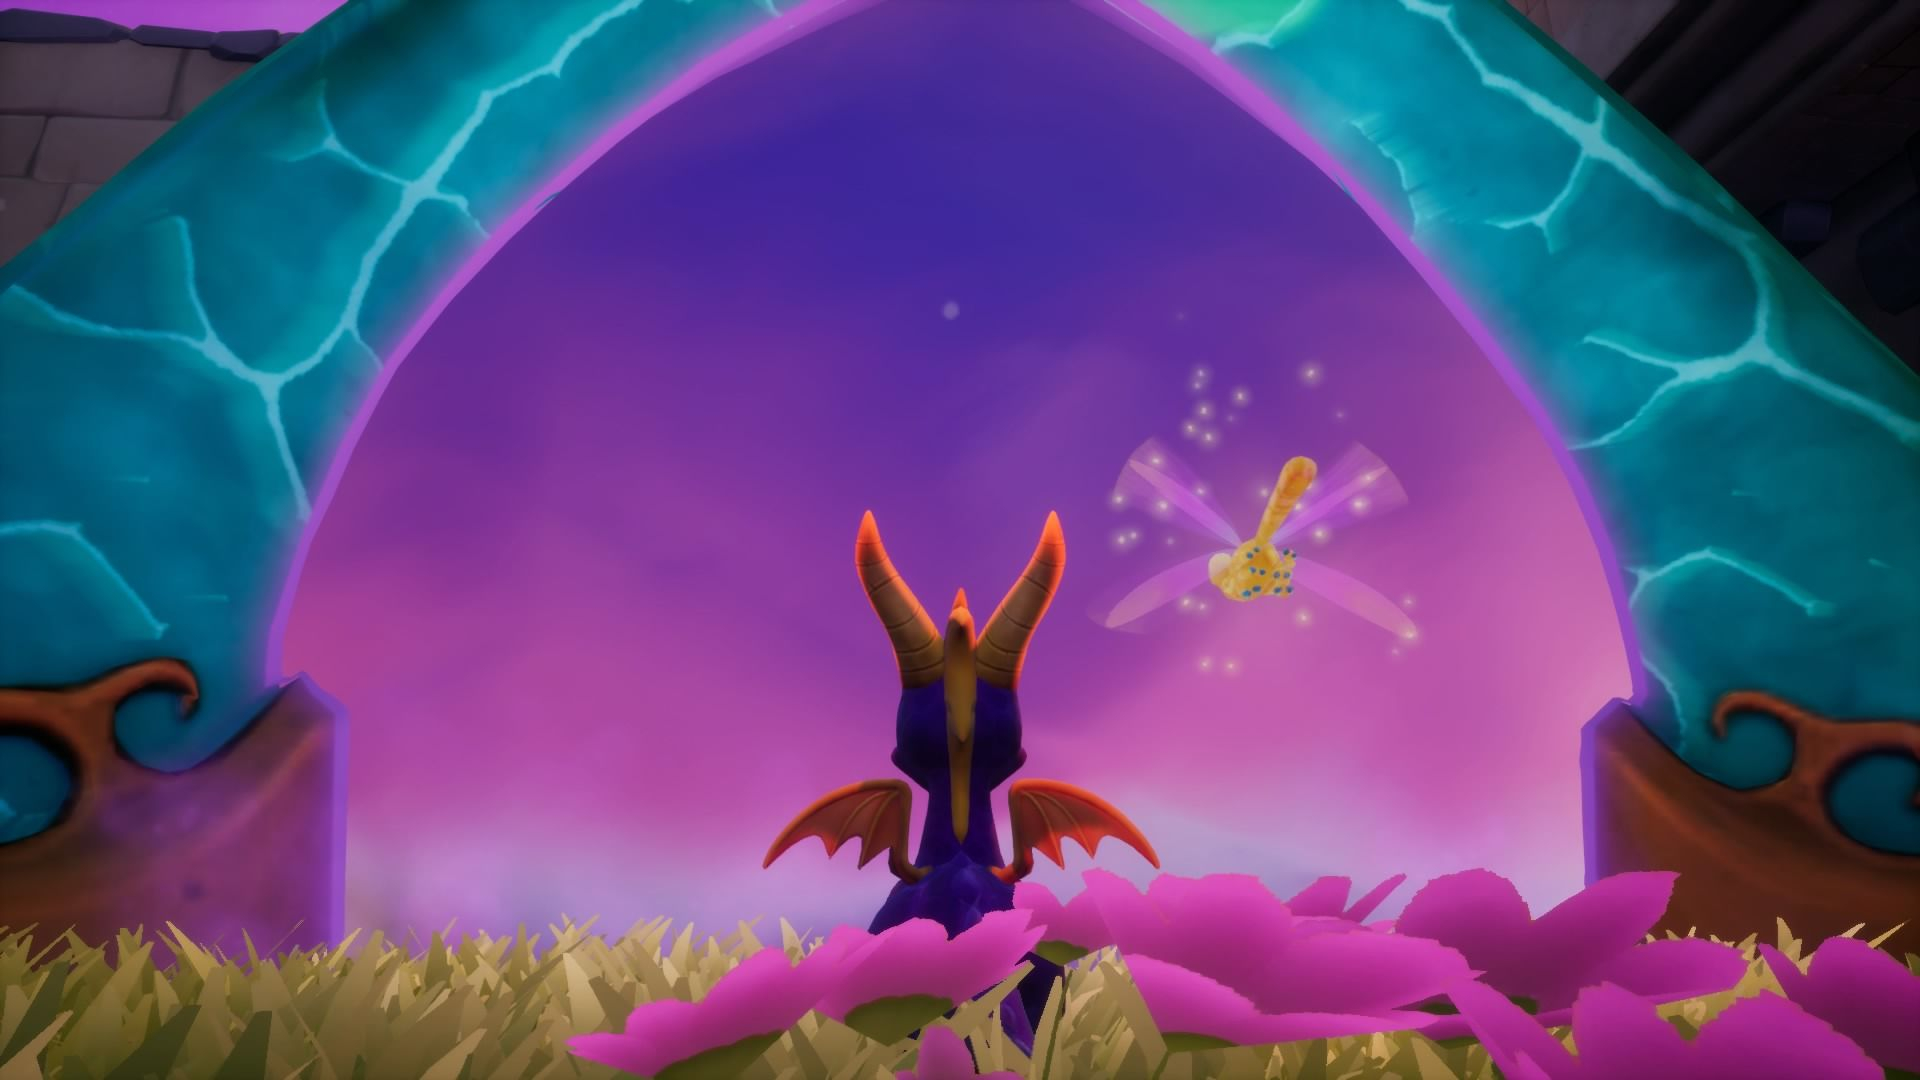 1920x1080 Spyro Reignited Trilogy | Spyro the dragon, And so the adventure begins, Wallpaper